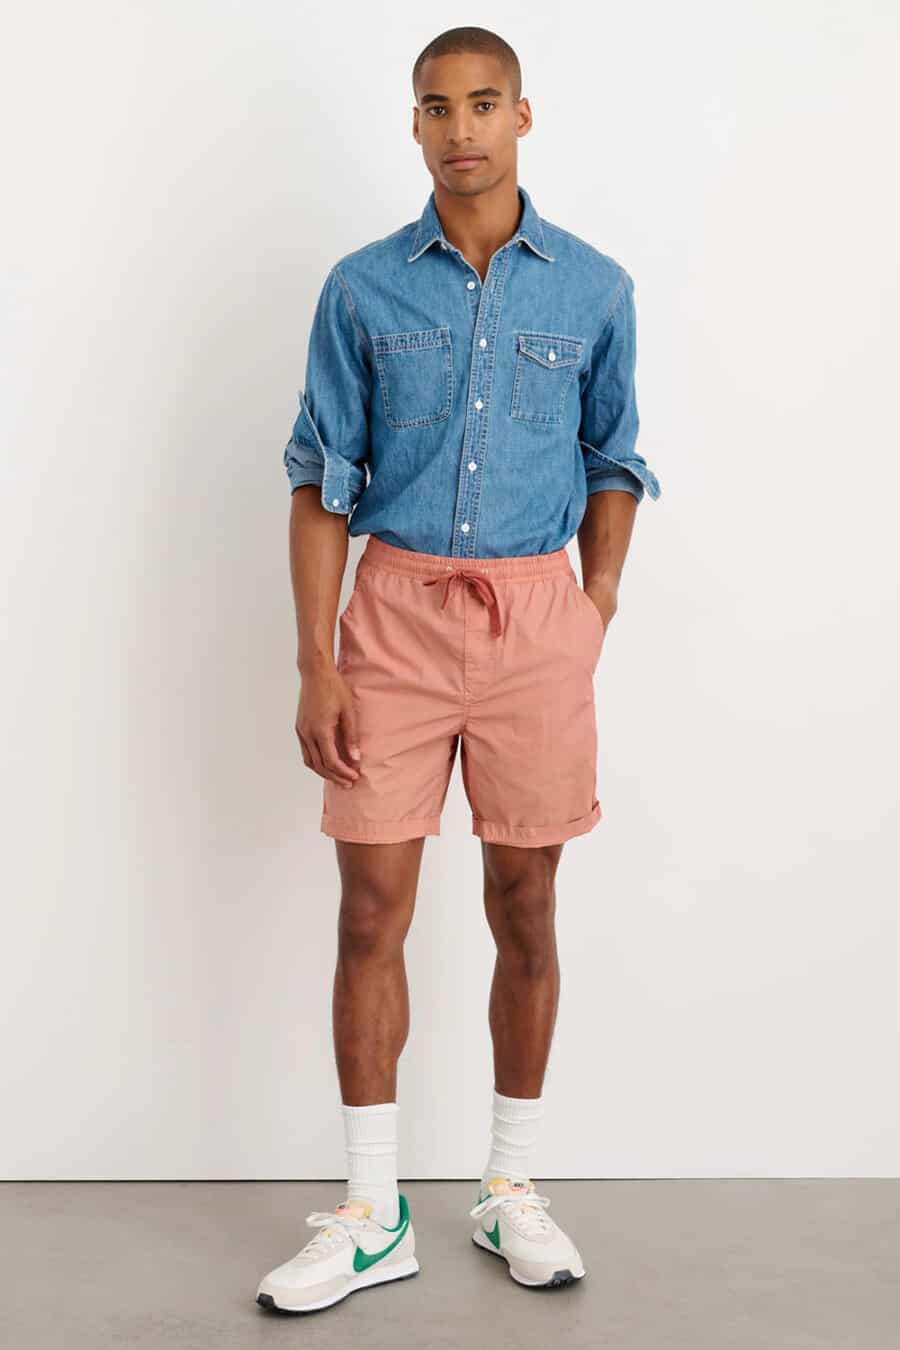 Men's coral pink shirts, tucked in mid-blue denim shirt, long white socks and Nike running sneakers outfit